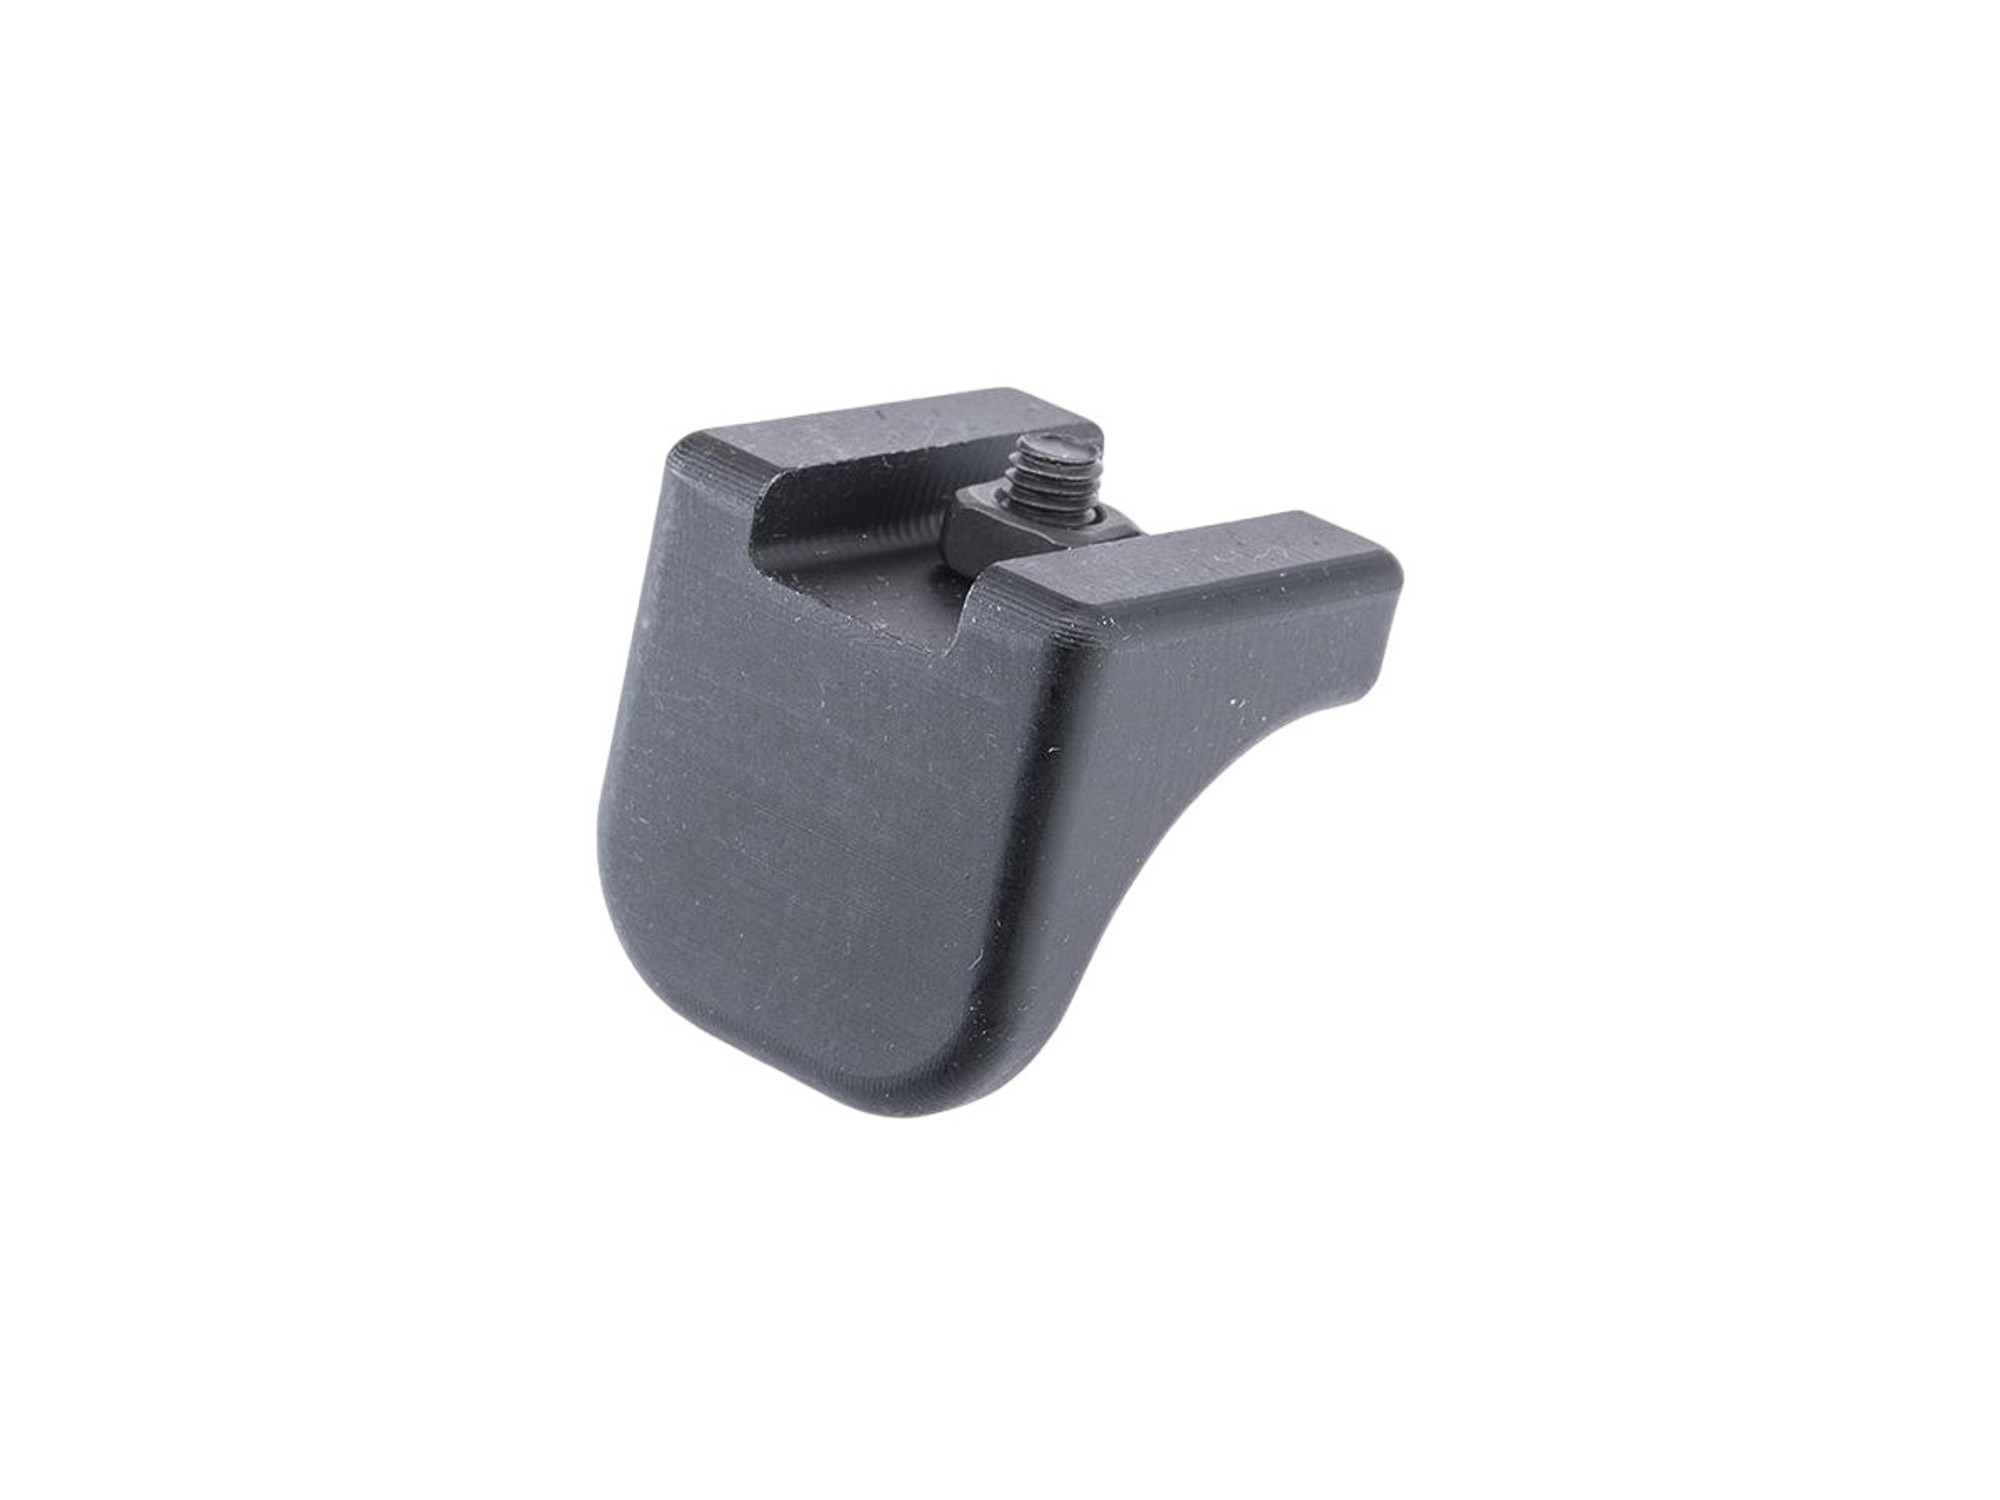 5KU Handstop for Airsoft Rifle Rail Systems (Model: LW URX)